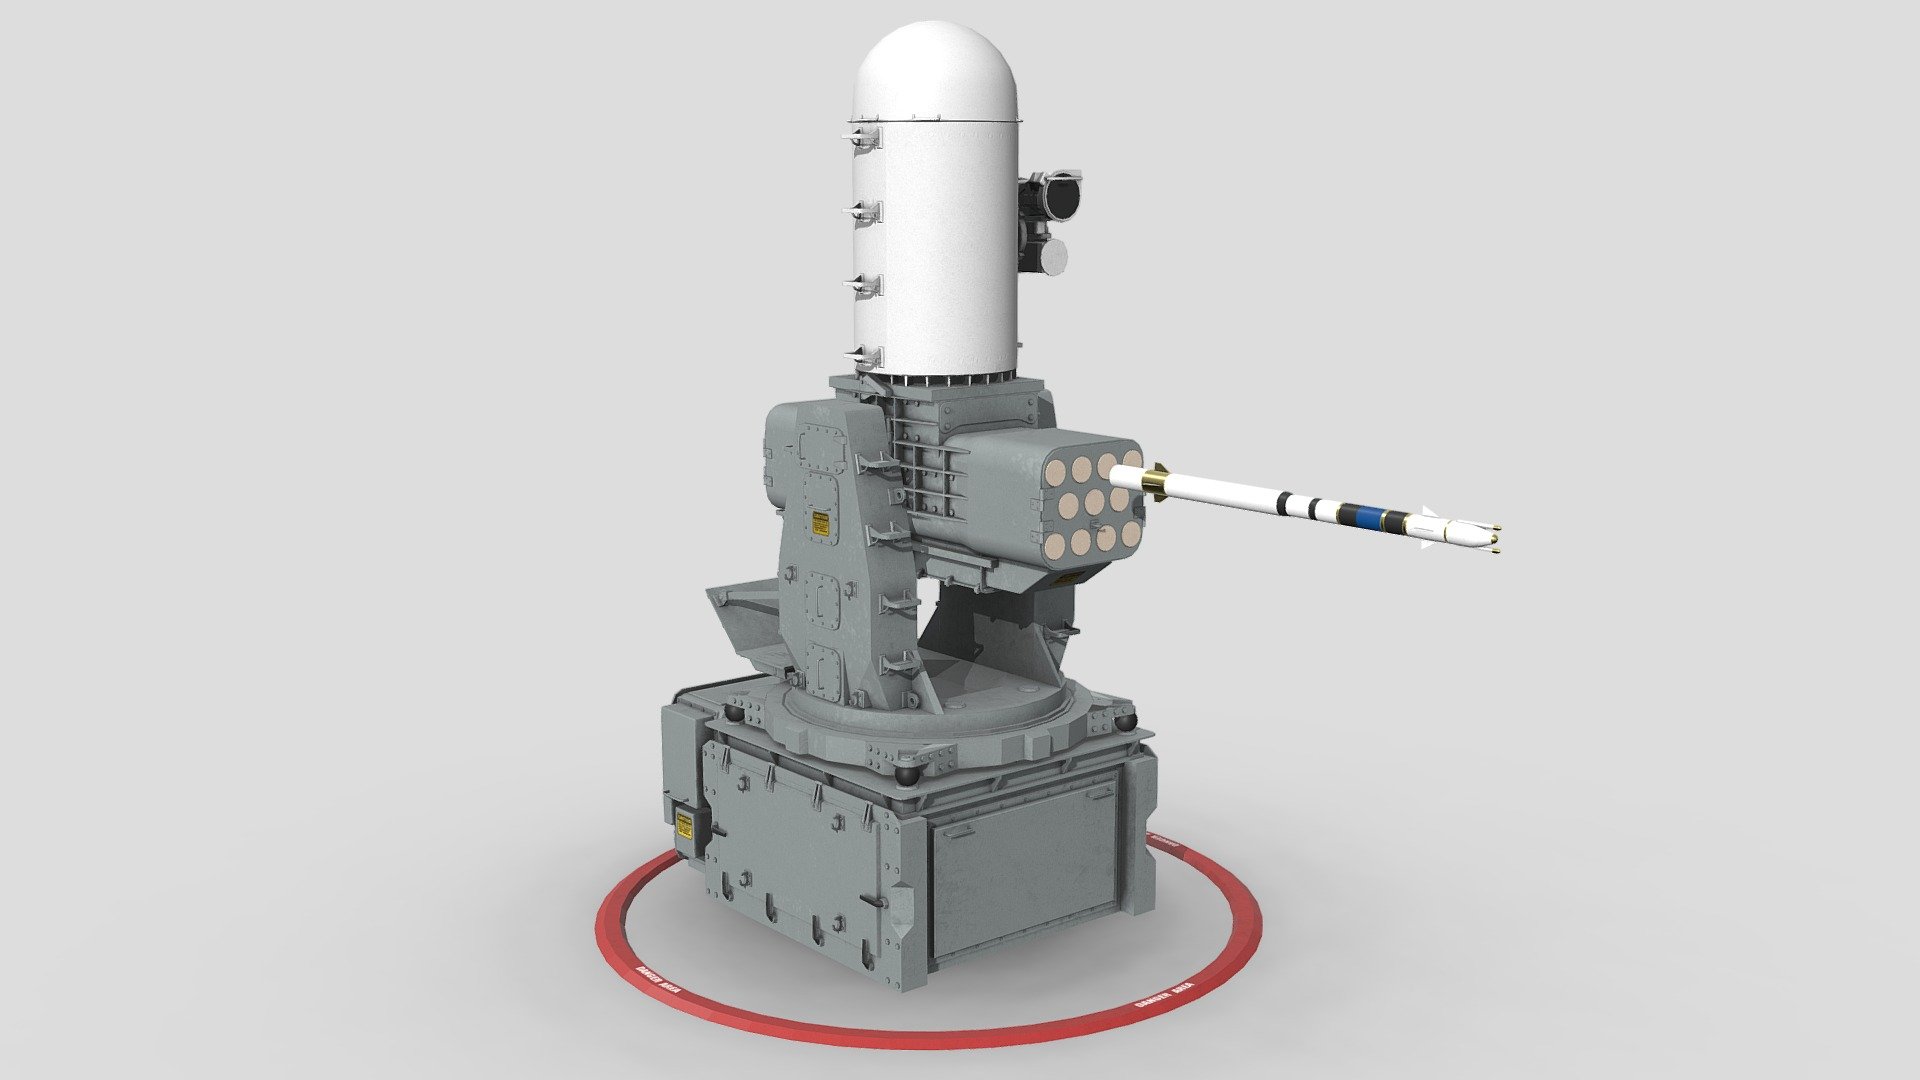 MK-15 Mod.31 SeaRAM Close-In Weapon System 
Missiles: 11 x RIM-116 rolling airframe missiles (RAM) 
Highly detailed MK-15 Mod.31 SeaRAM model 
For far and near angles. 
For rendering animations and games. 
Has real dimensions. 
Model formats: * .max . ma .fbx .blend 
All textures are 4k resolution - Mk 15 Mod 31 SeaRAM - Buy Royalty Free 3D model by IgYerm (@IgorYerm) 3d model